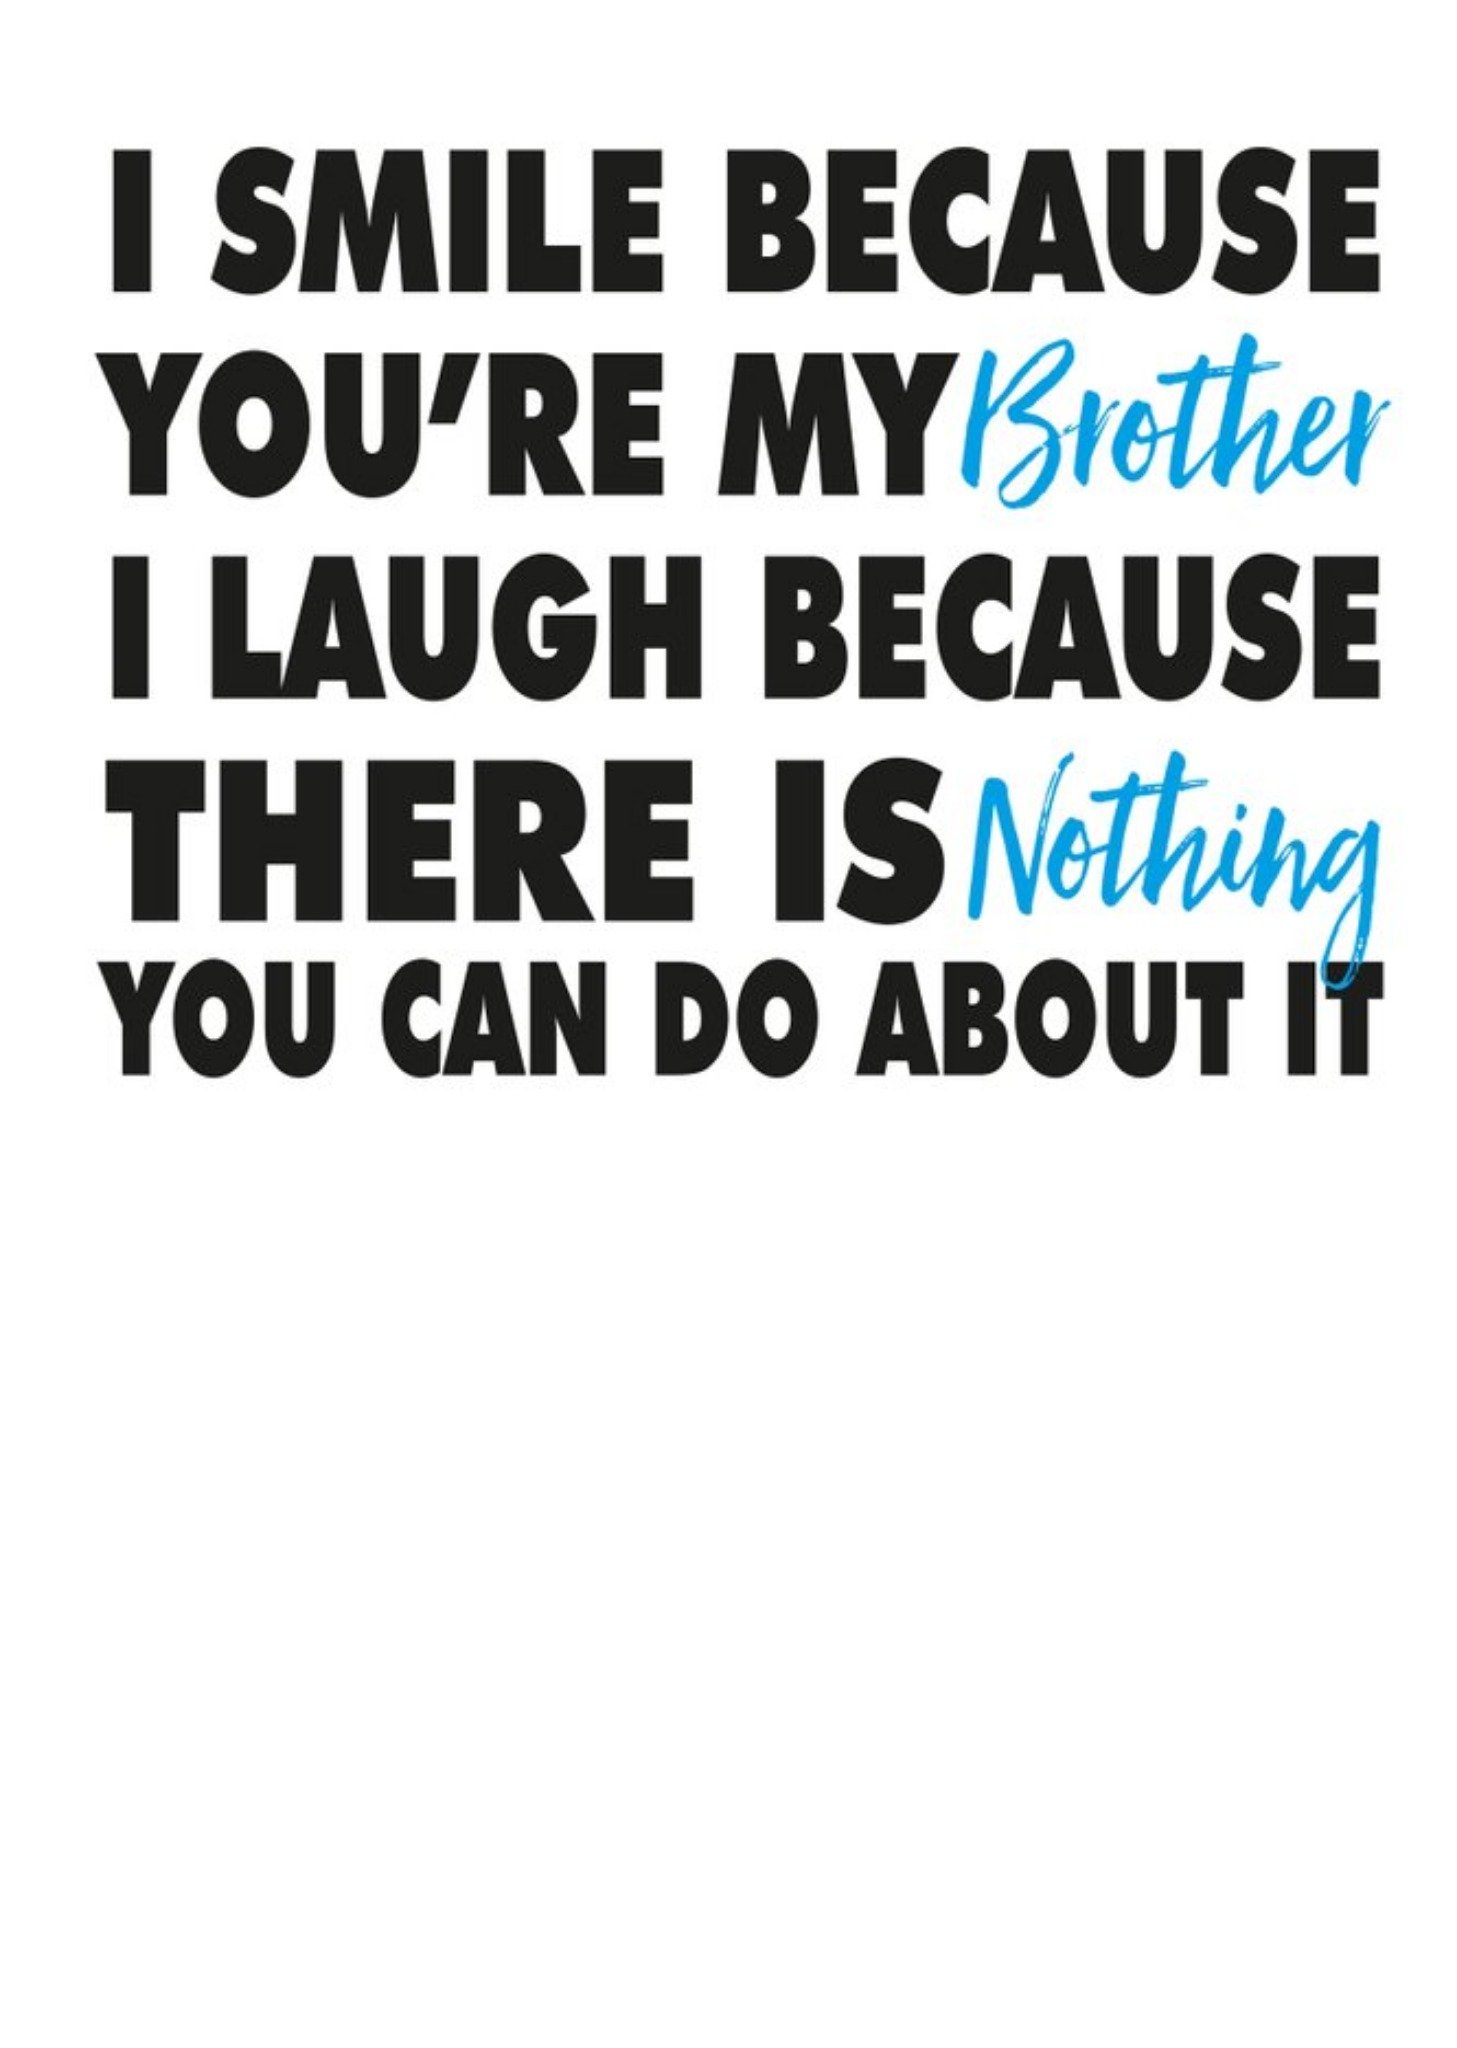 Filthy Sentiments Modern Funny Cheeky Smile Laugh Because You're My Brother Birthday Card Ecard